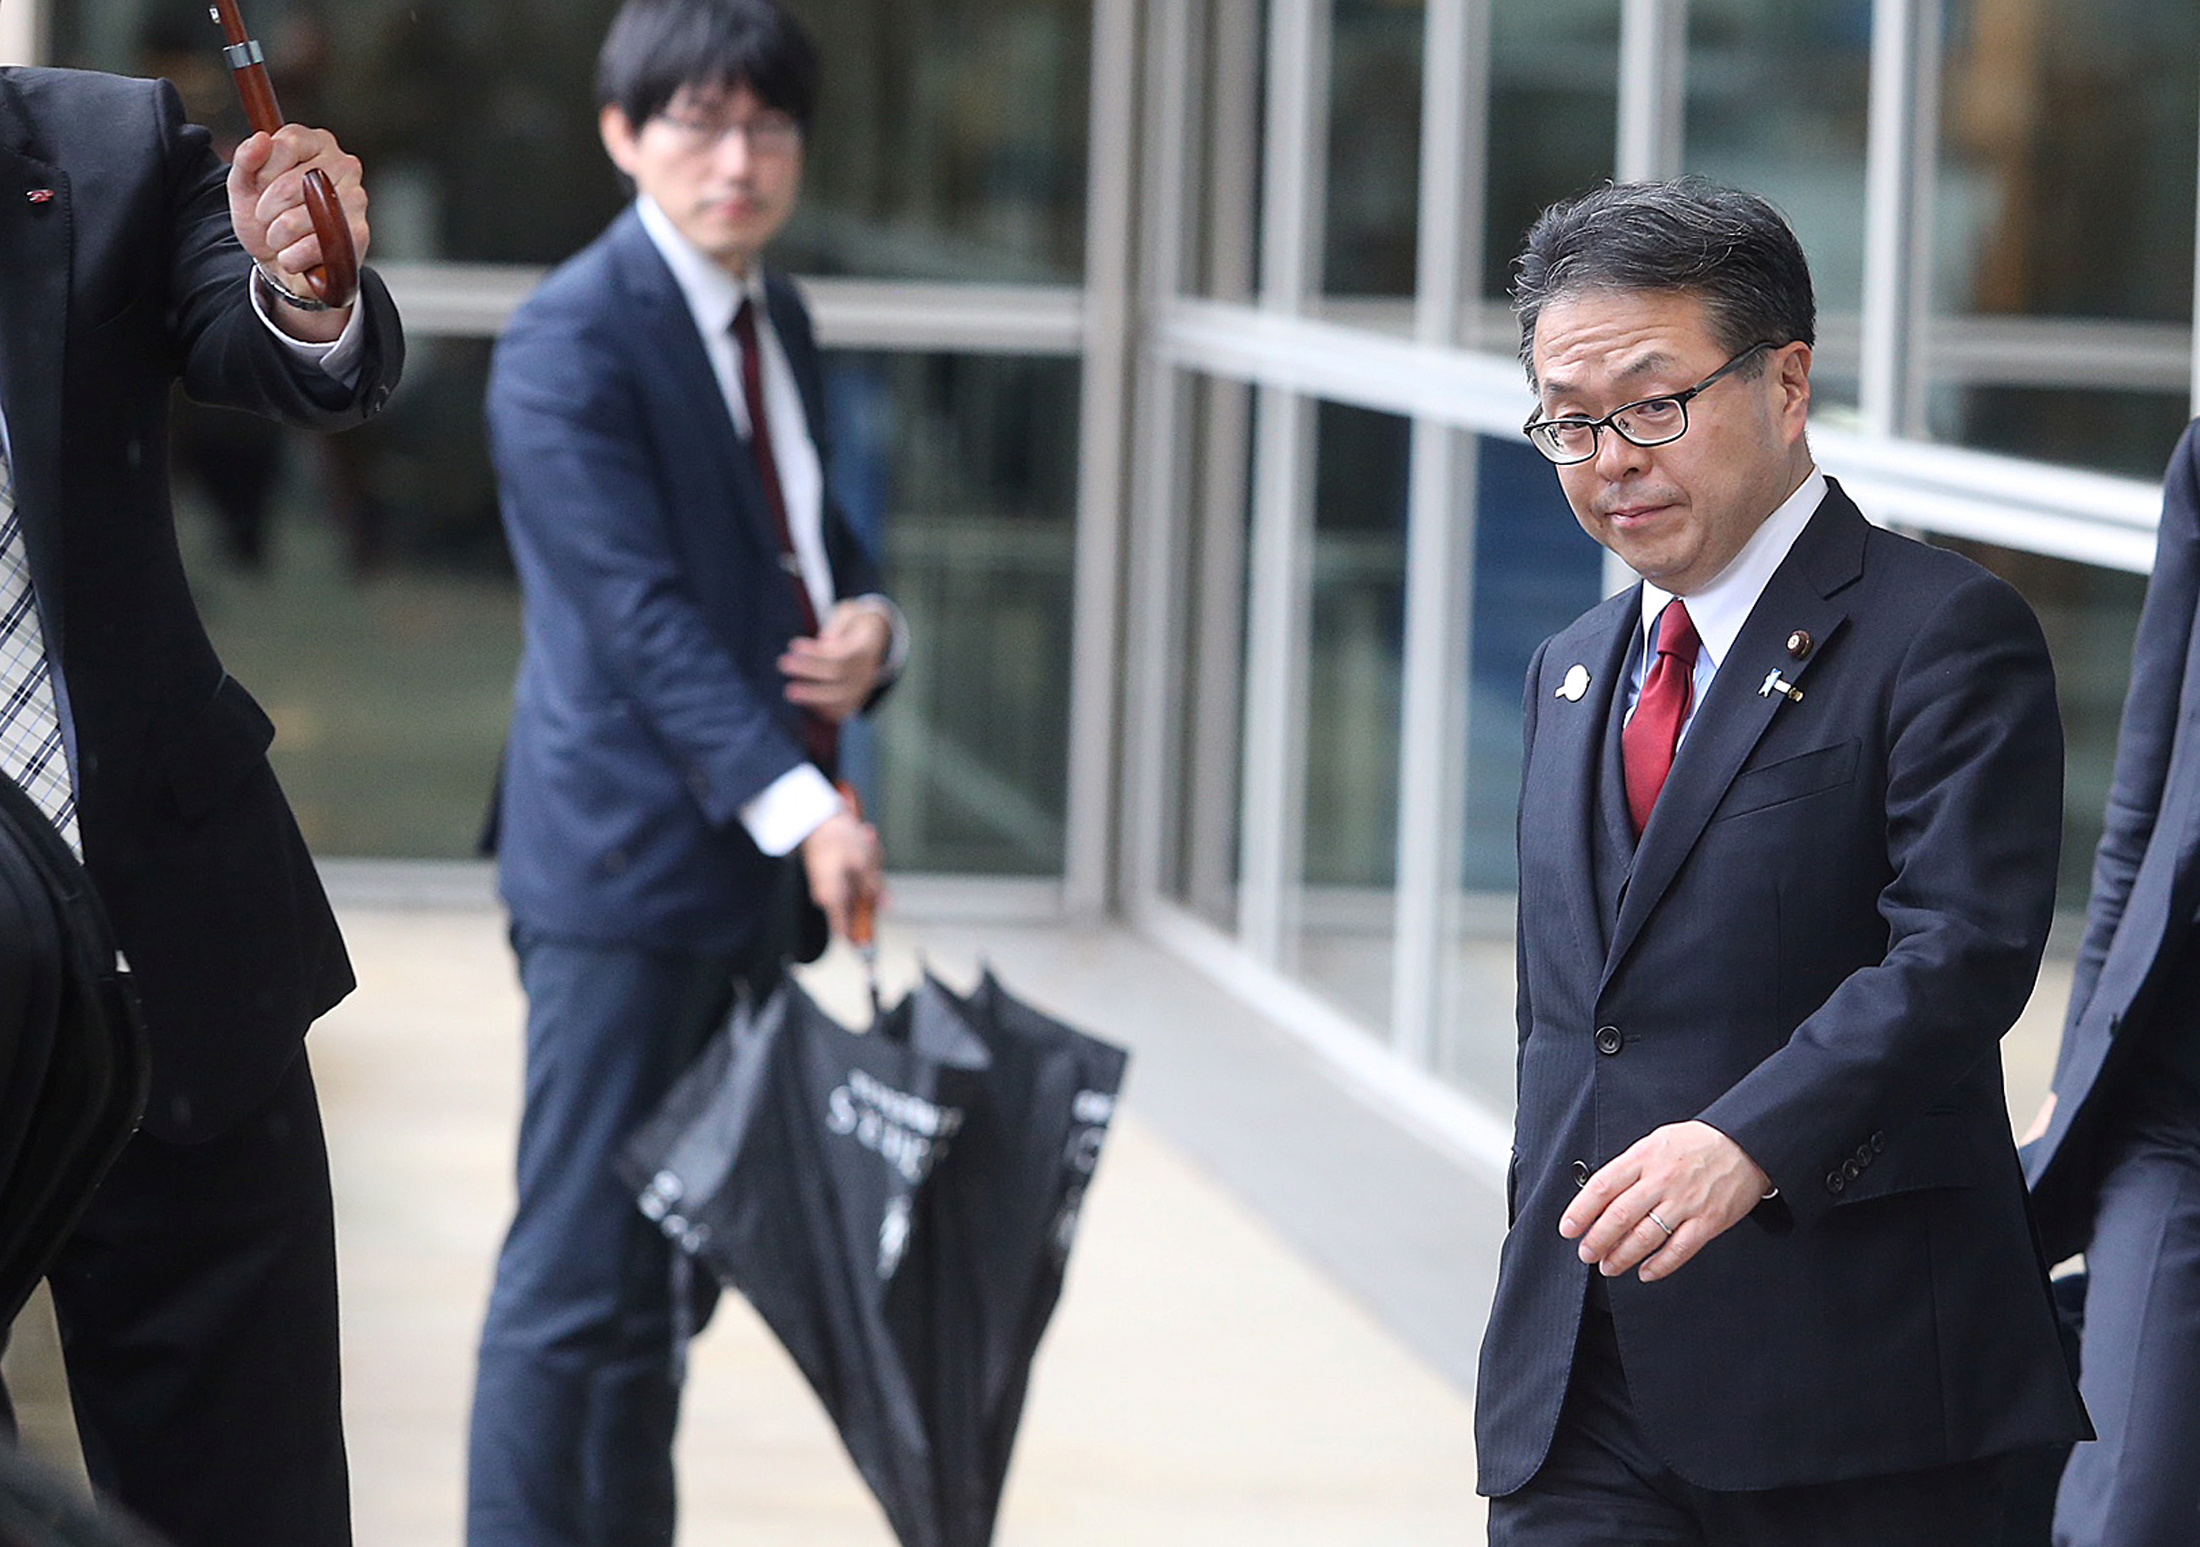 Japan's Minister of Economy, Trade and Industry Hiroshige Seko leaves the European Commission headquarters after a meeting on steel overcapacity, in Brussels